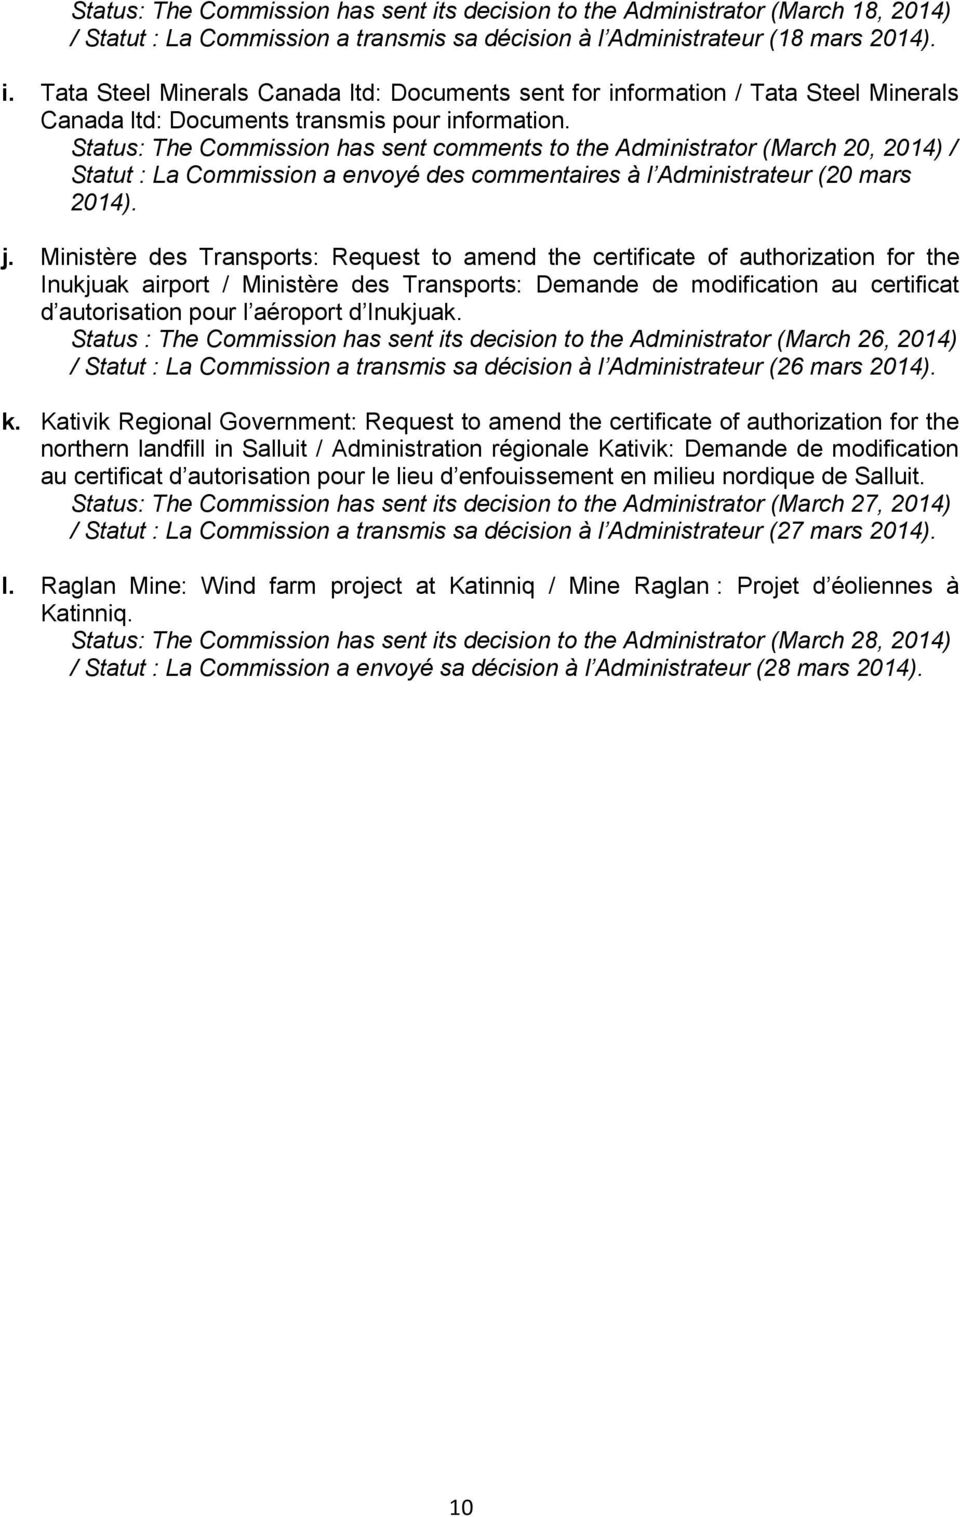 Ministère des Transports: Request to amend the certificate of authorization for the Inukjuak airport / Ministère des Transports: Demande de modification au certificat d autorisation pour l aéroport d